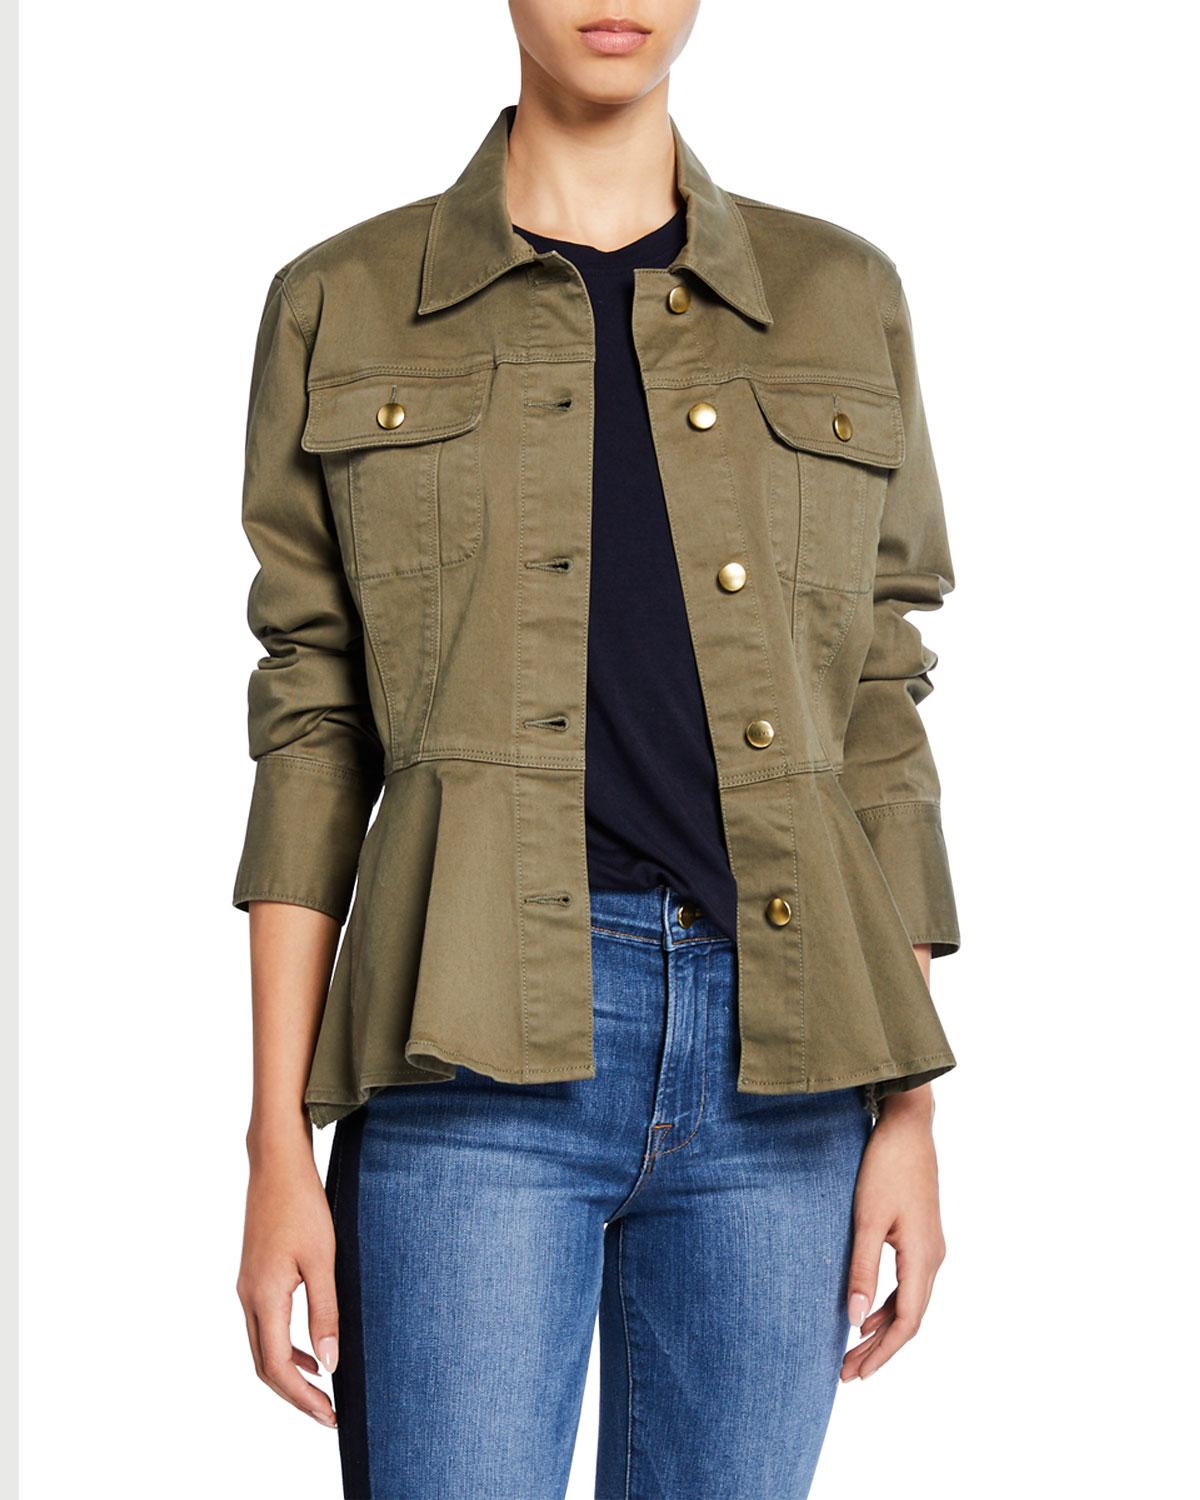 FRAME Cotton Button-front Peplum Jean Jacket in Army Green (Green) - Lyst